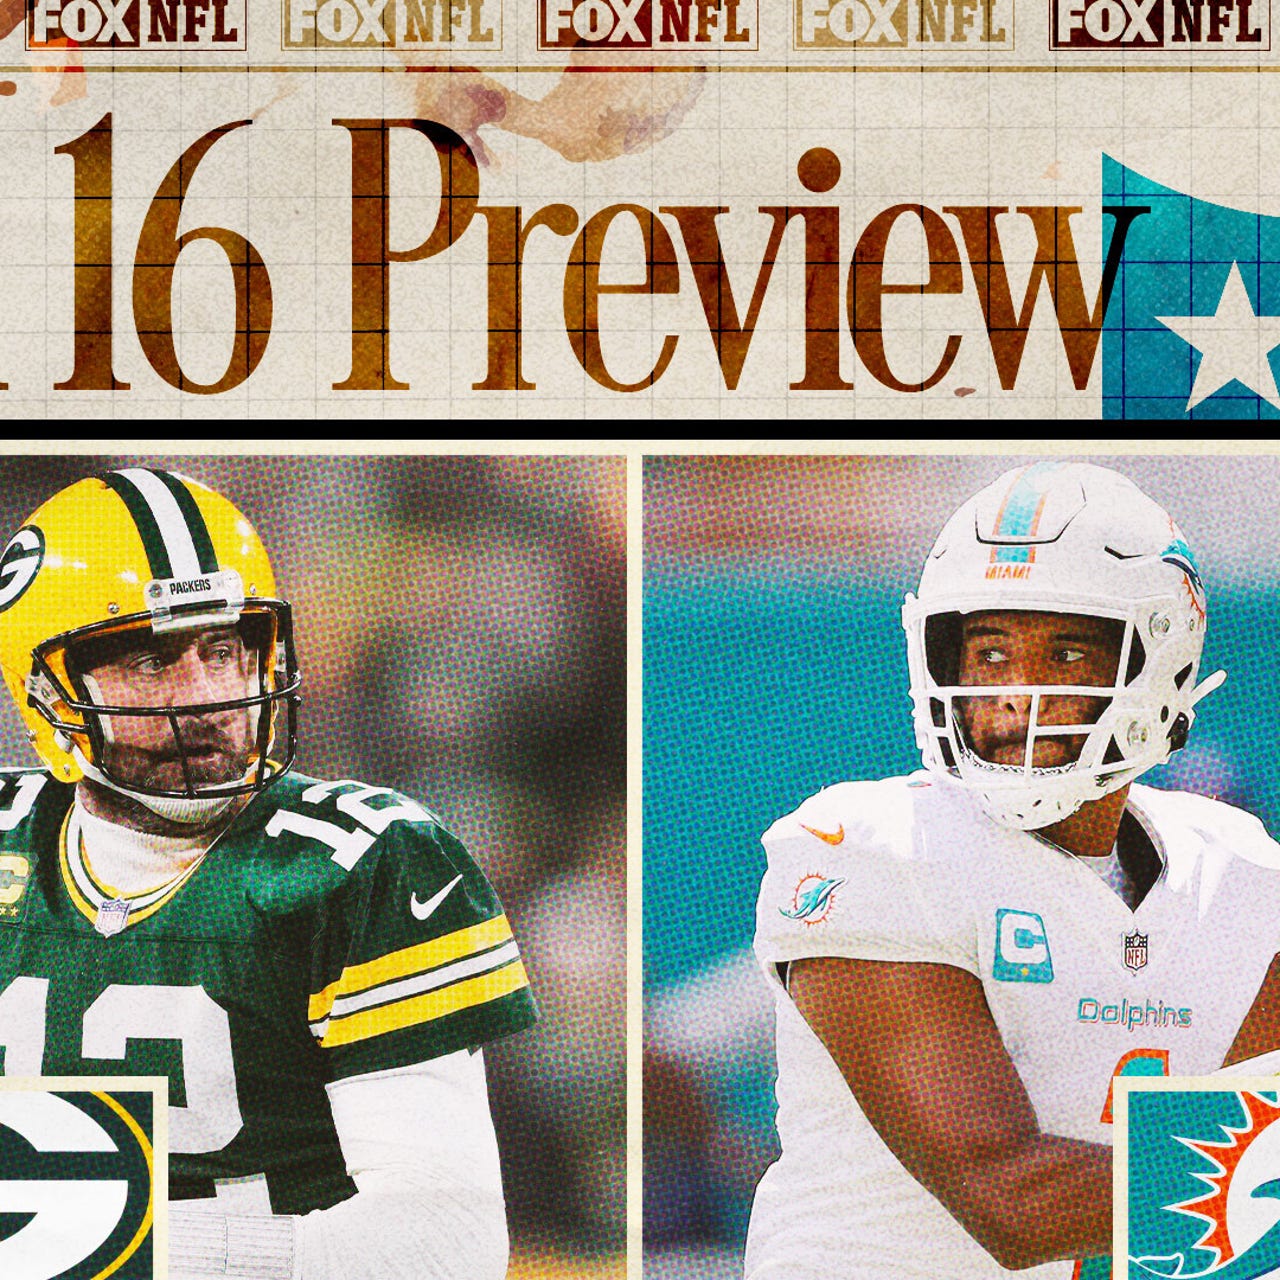 Playoff implications at stake when Packers visit Dolphins on